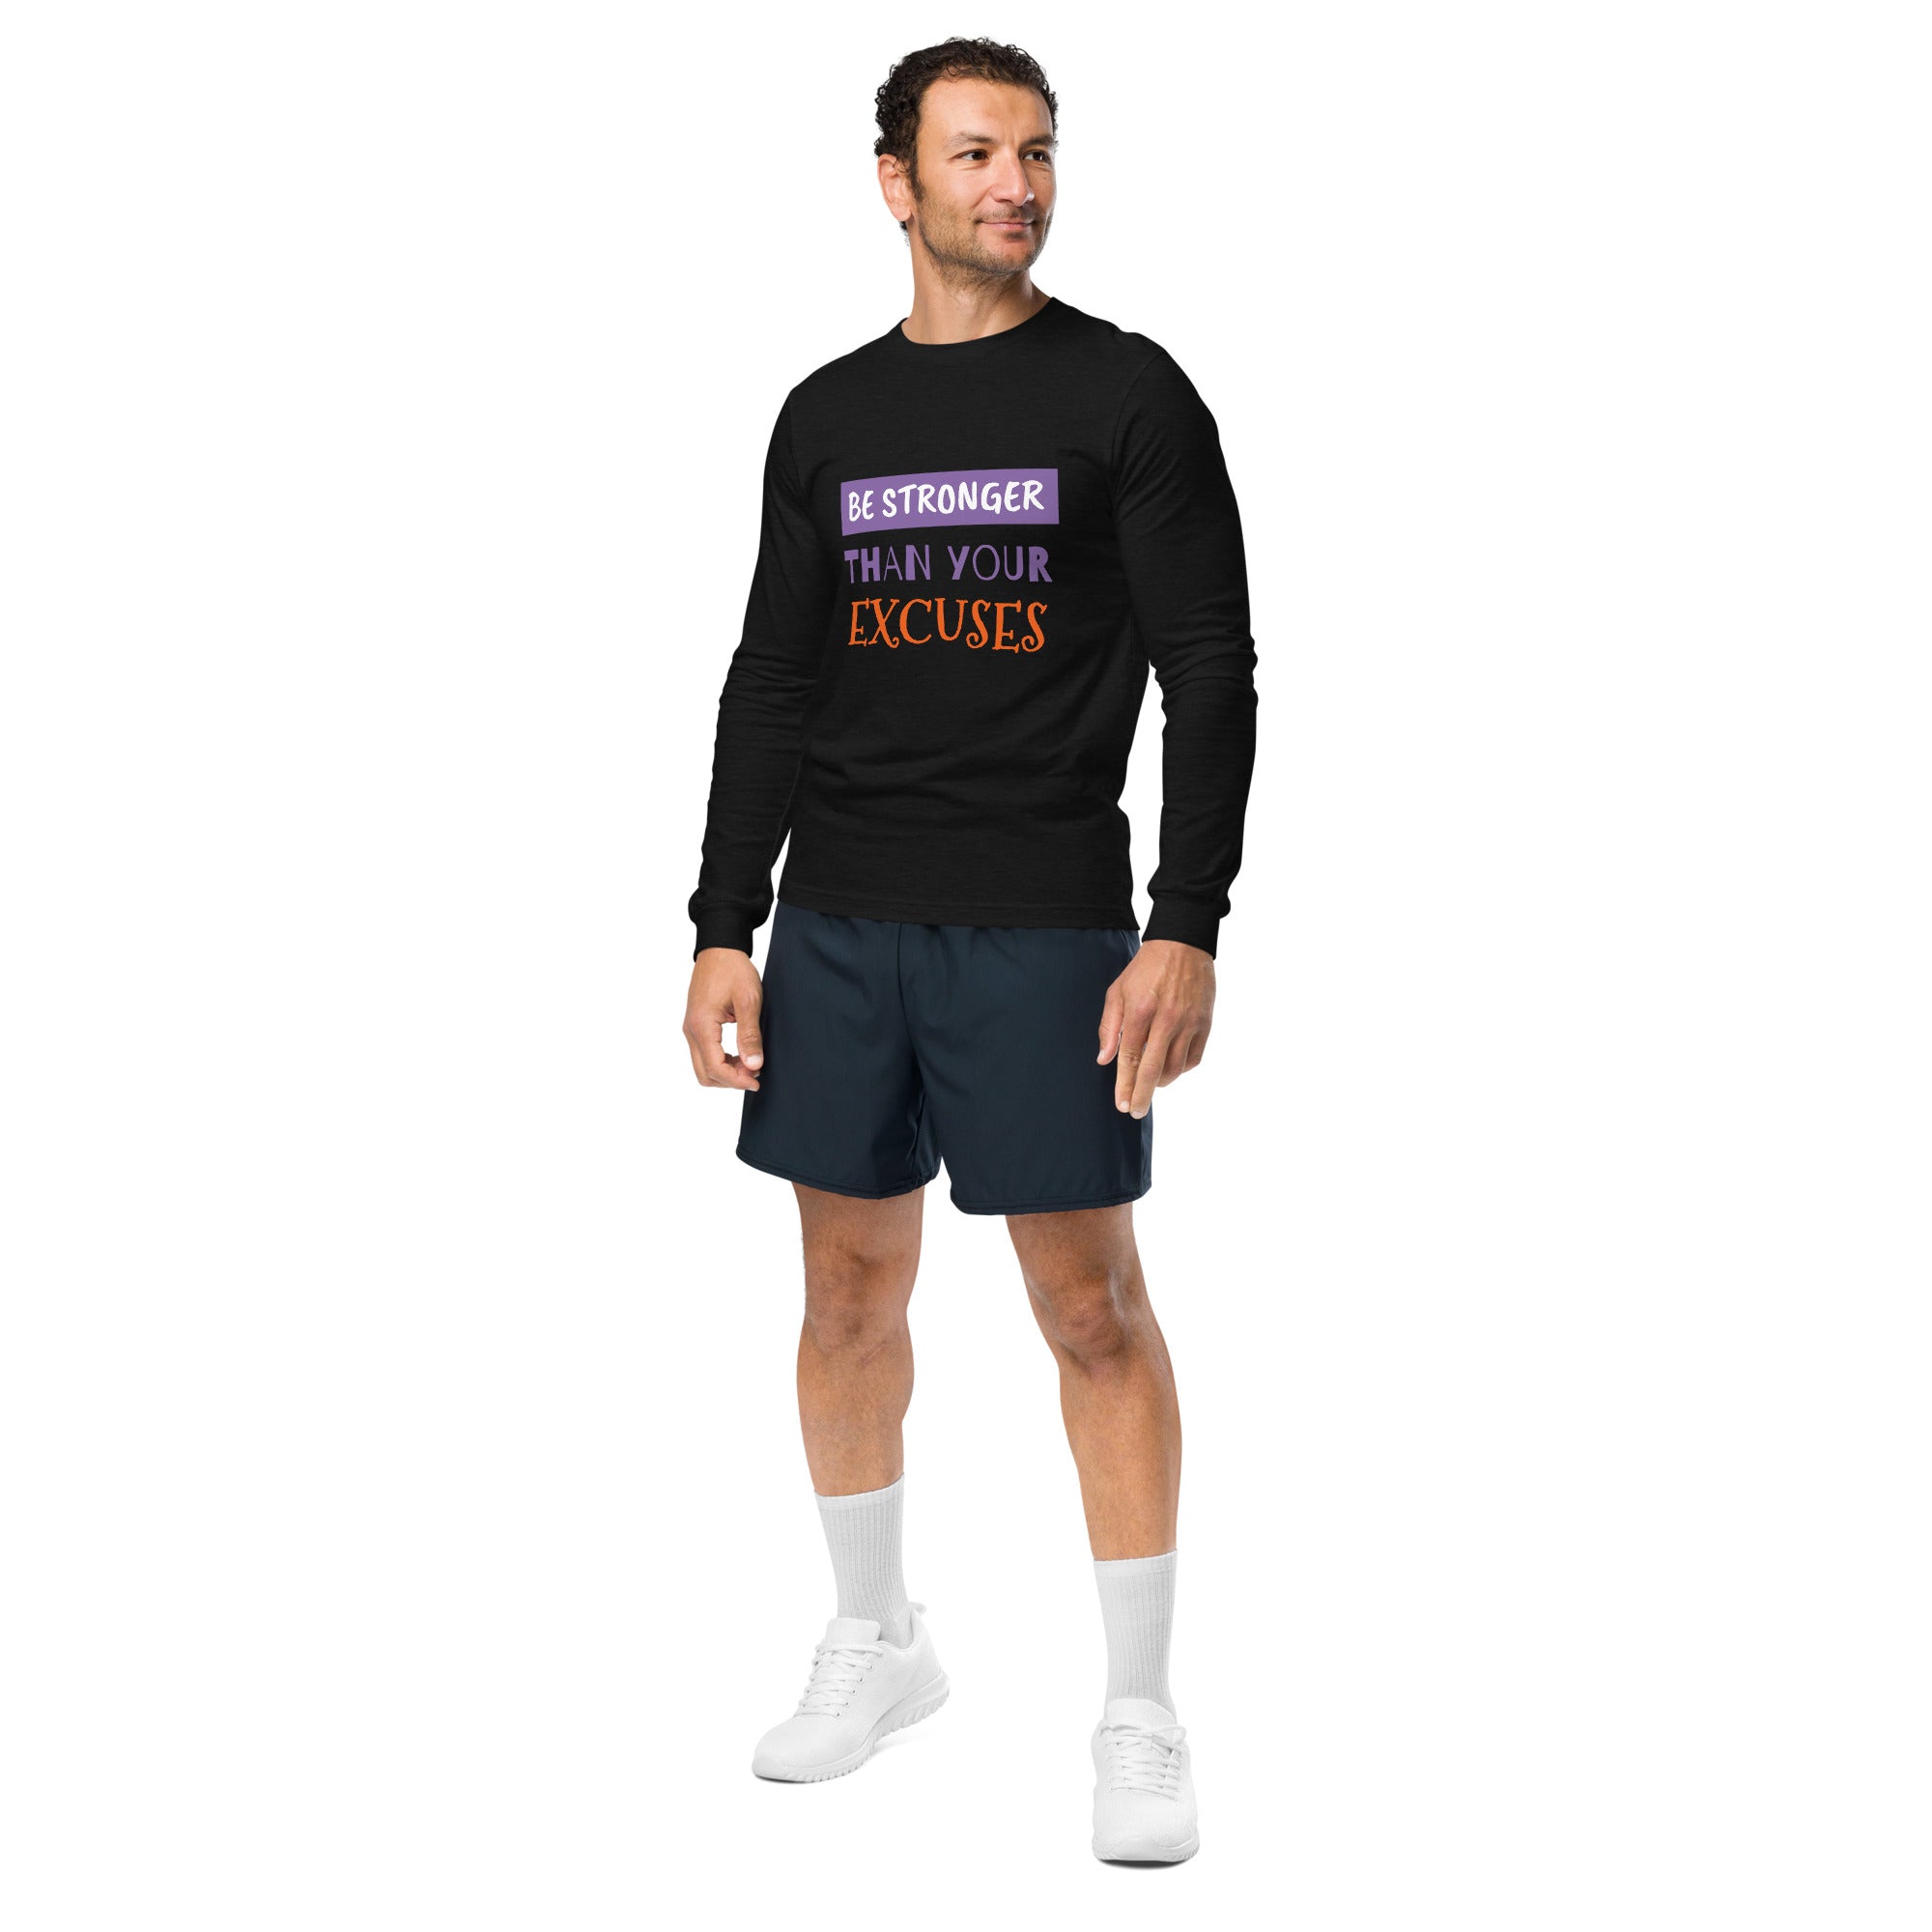 BE STRONGER THAN YOUR EXCUSES Long Sleeve Tee